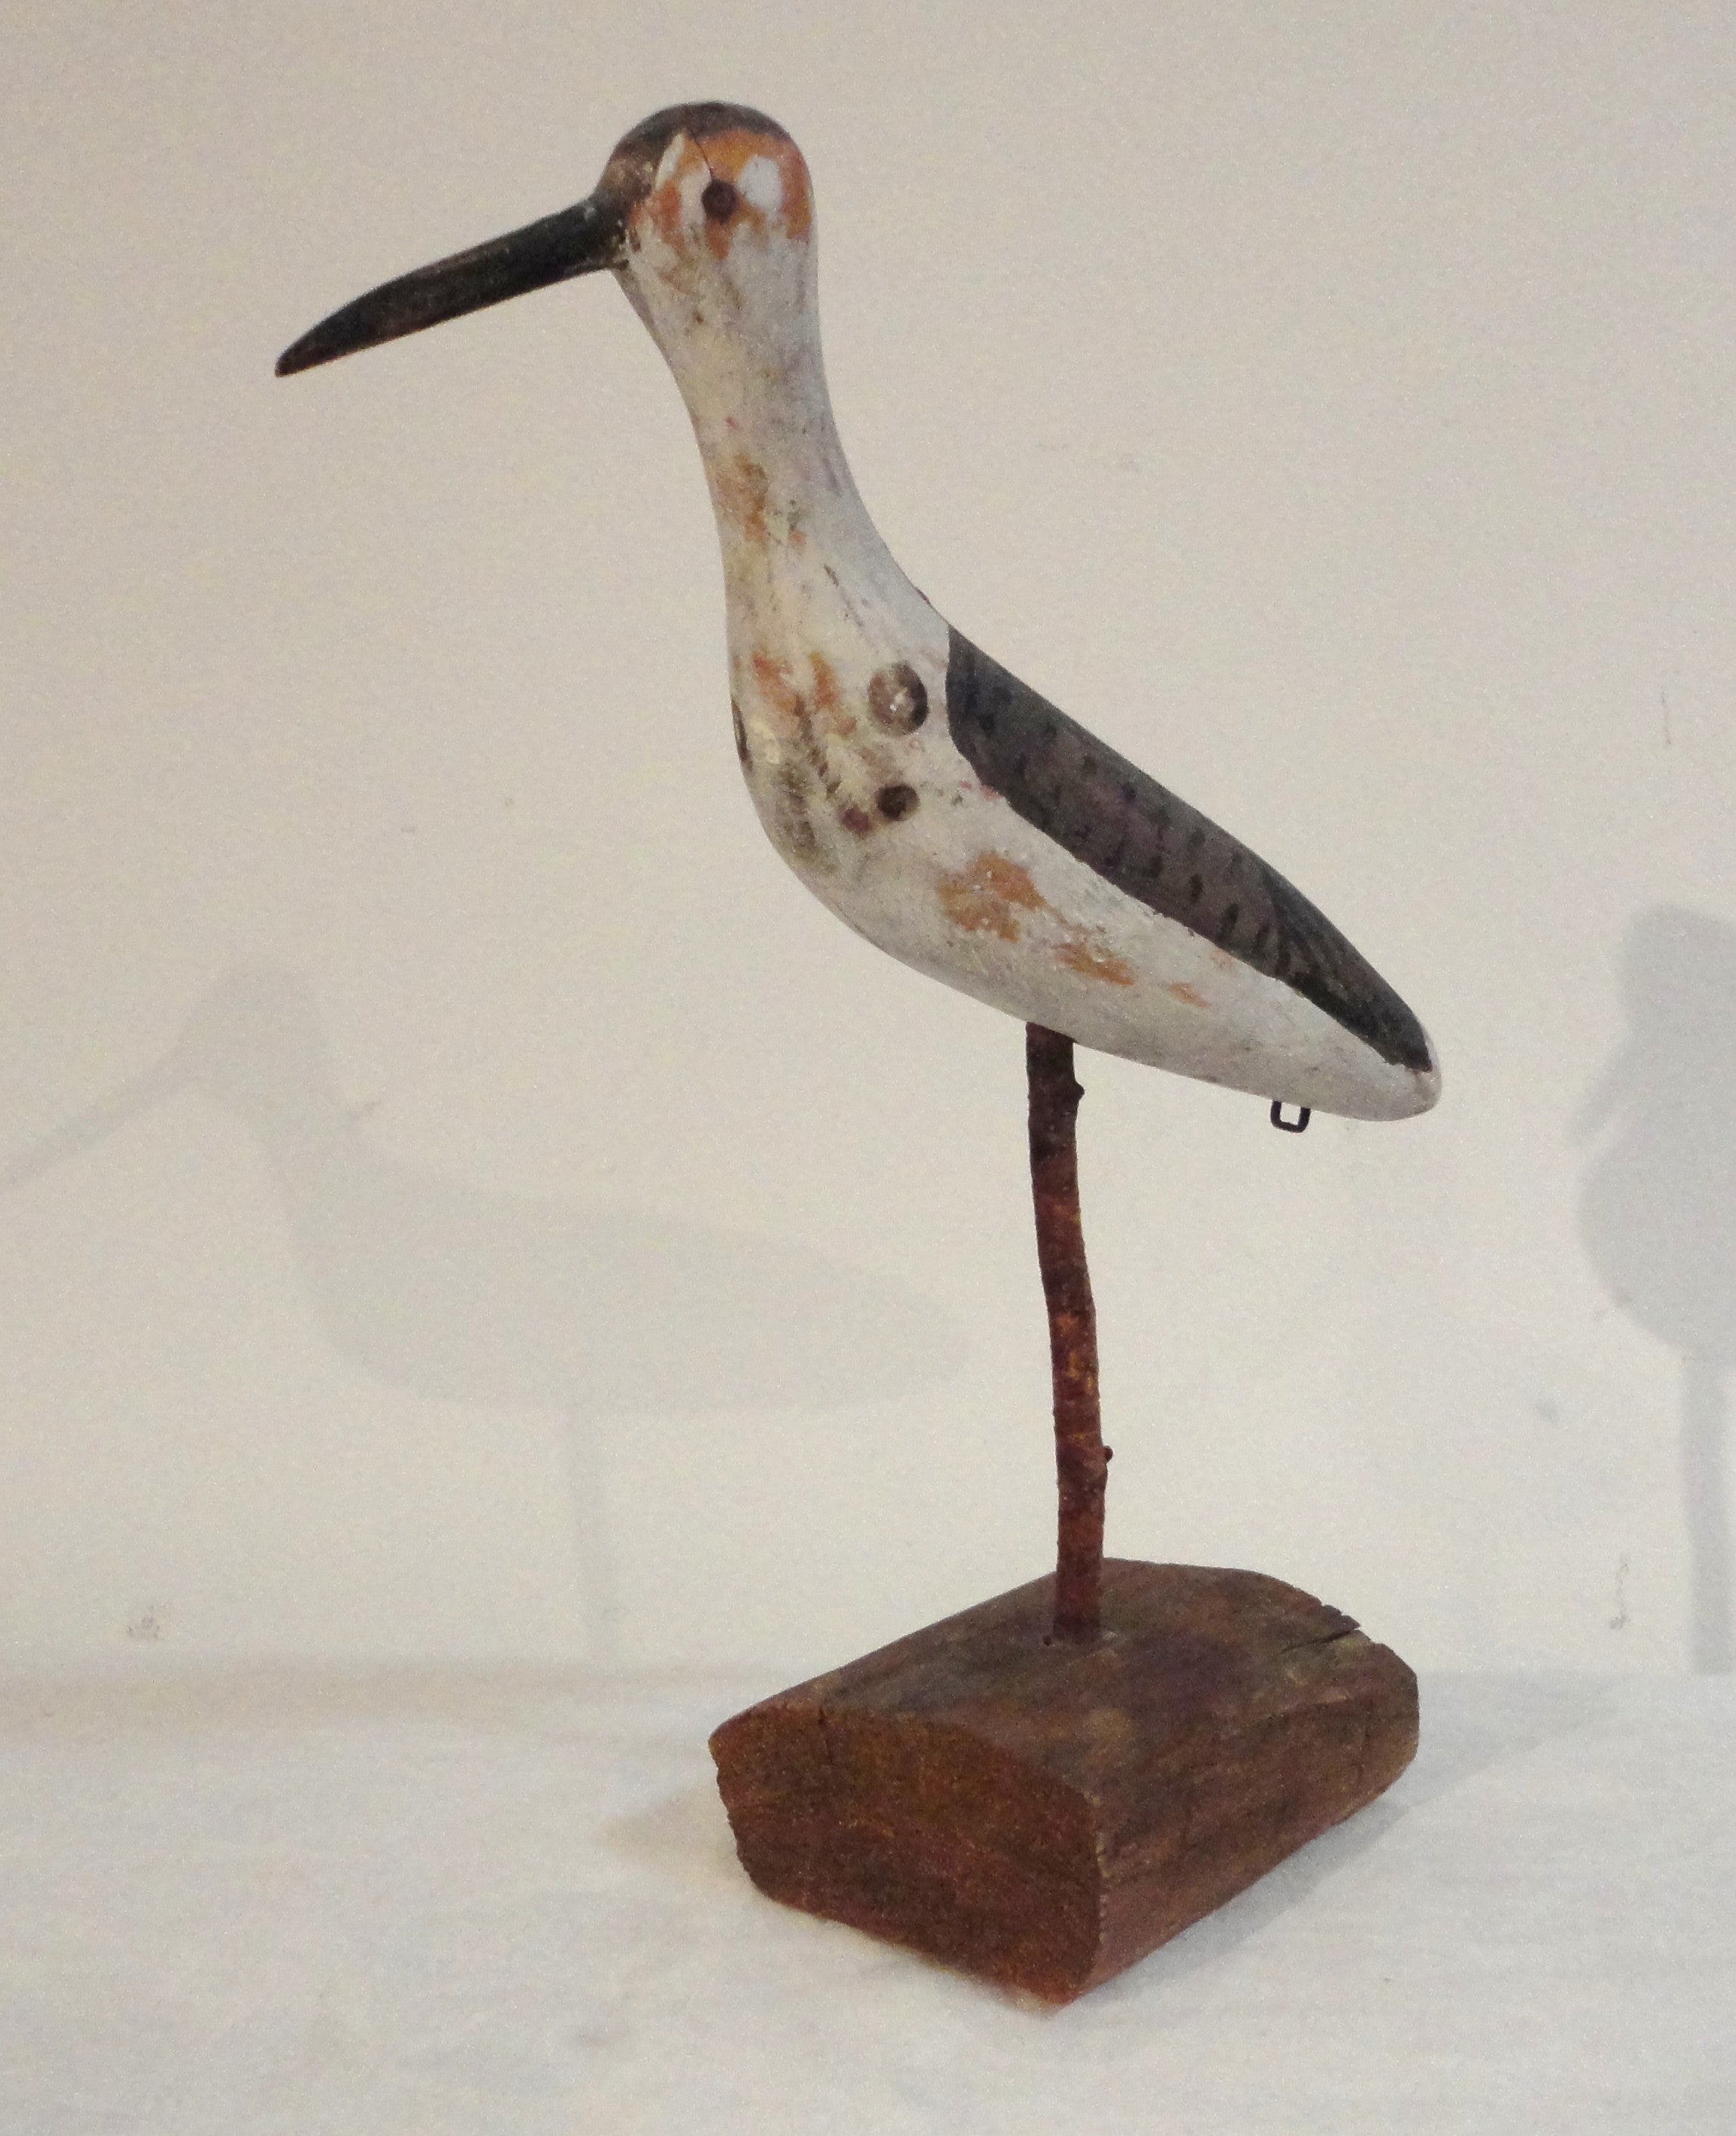 Early 20thc Signed "Randall" Original  Carved & Painted Shorebird on Wood Block